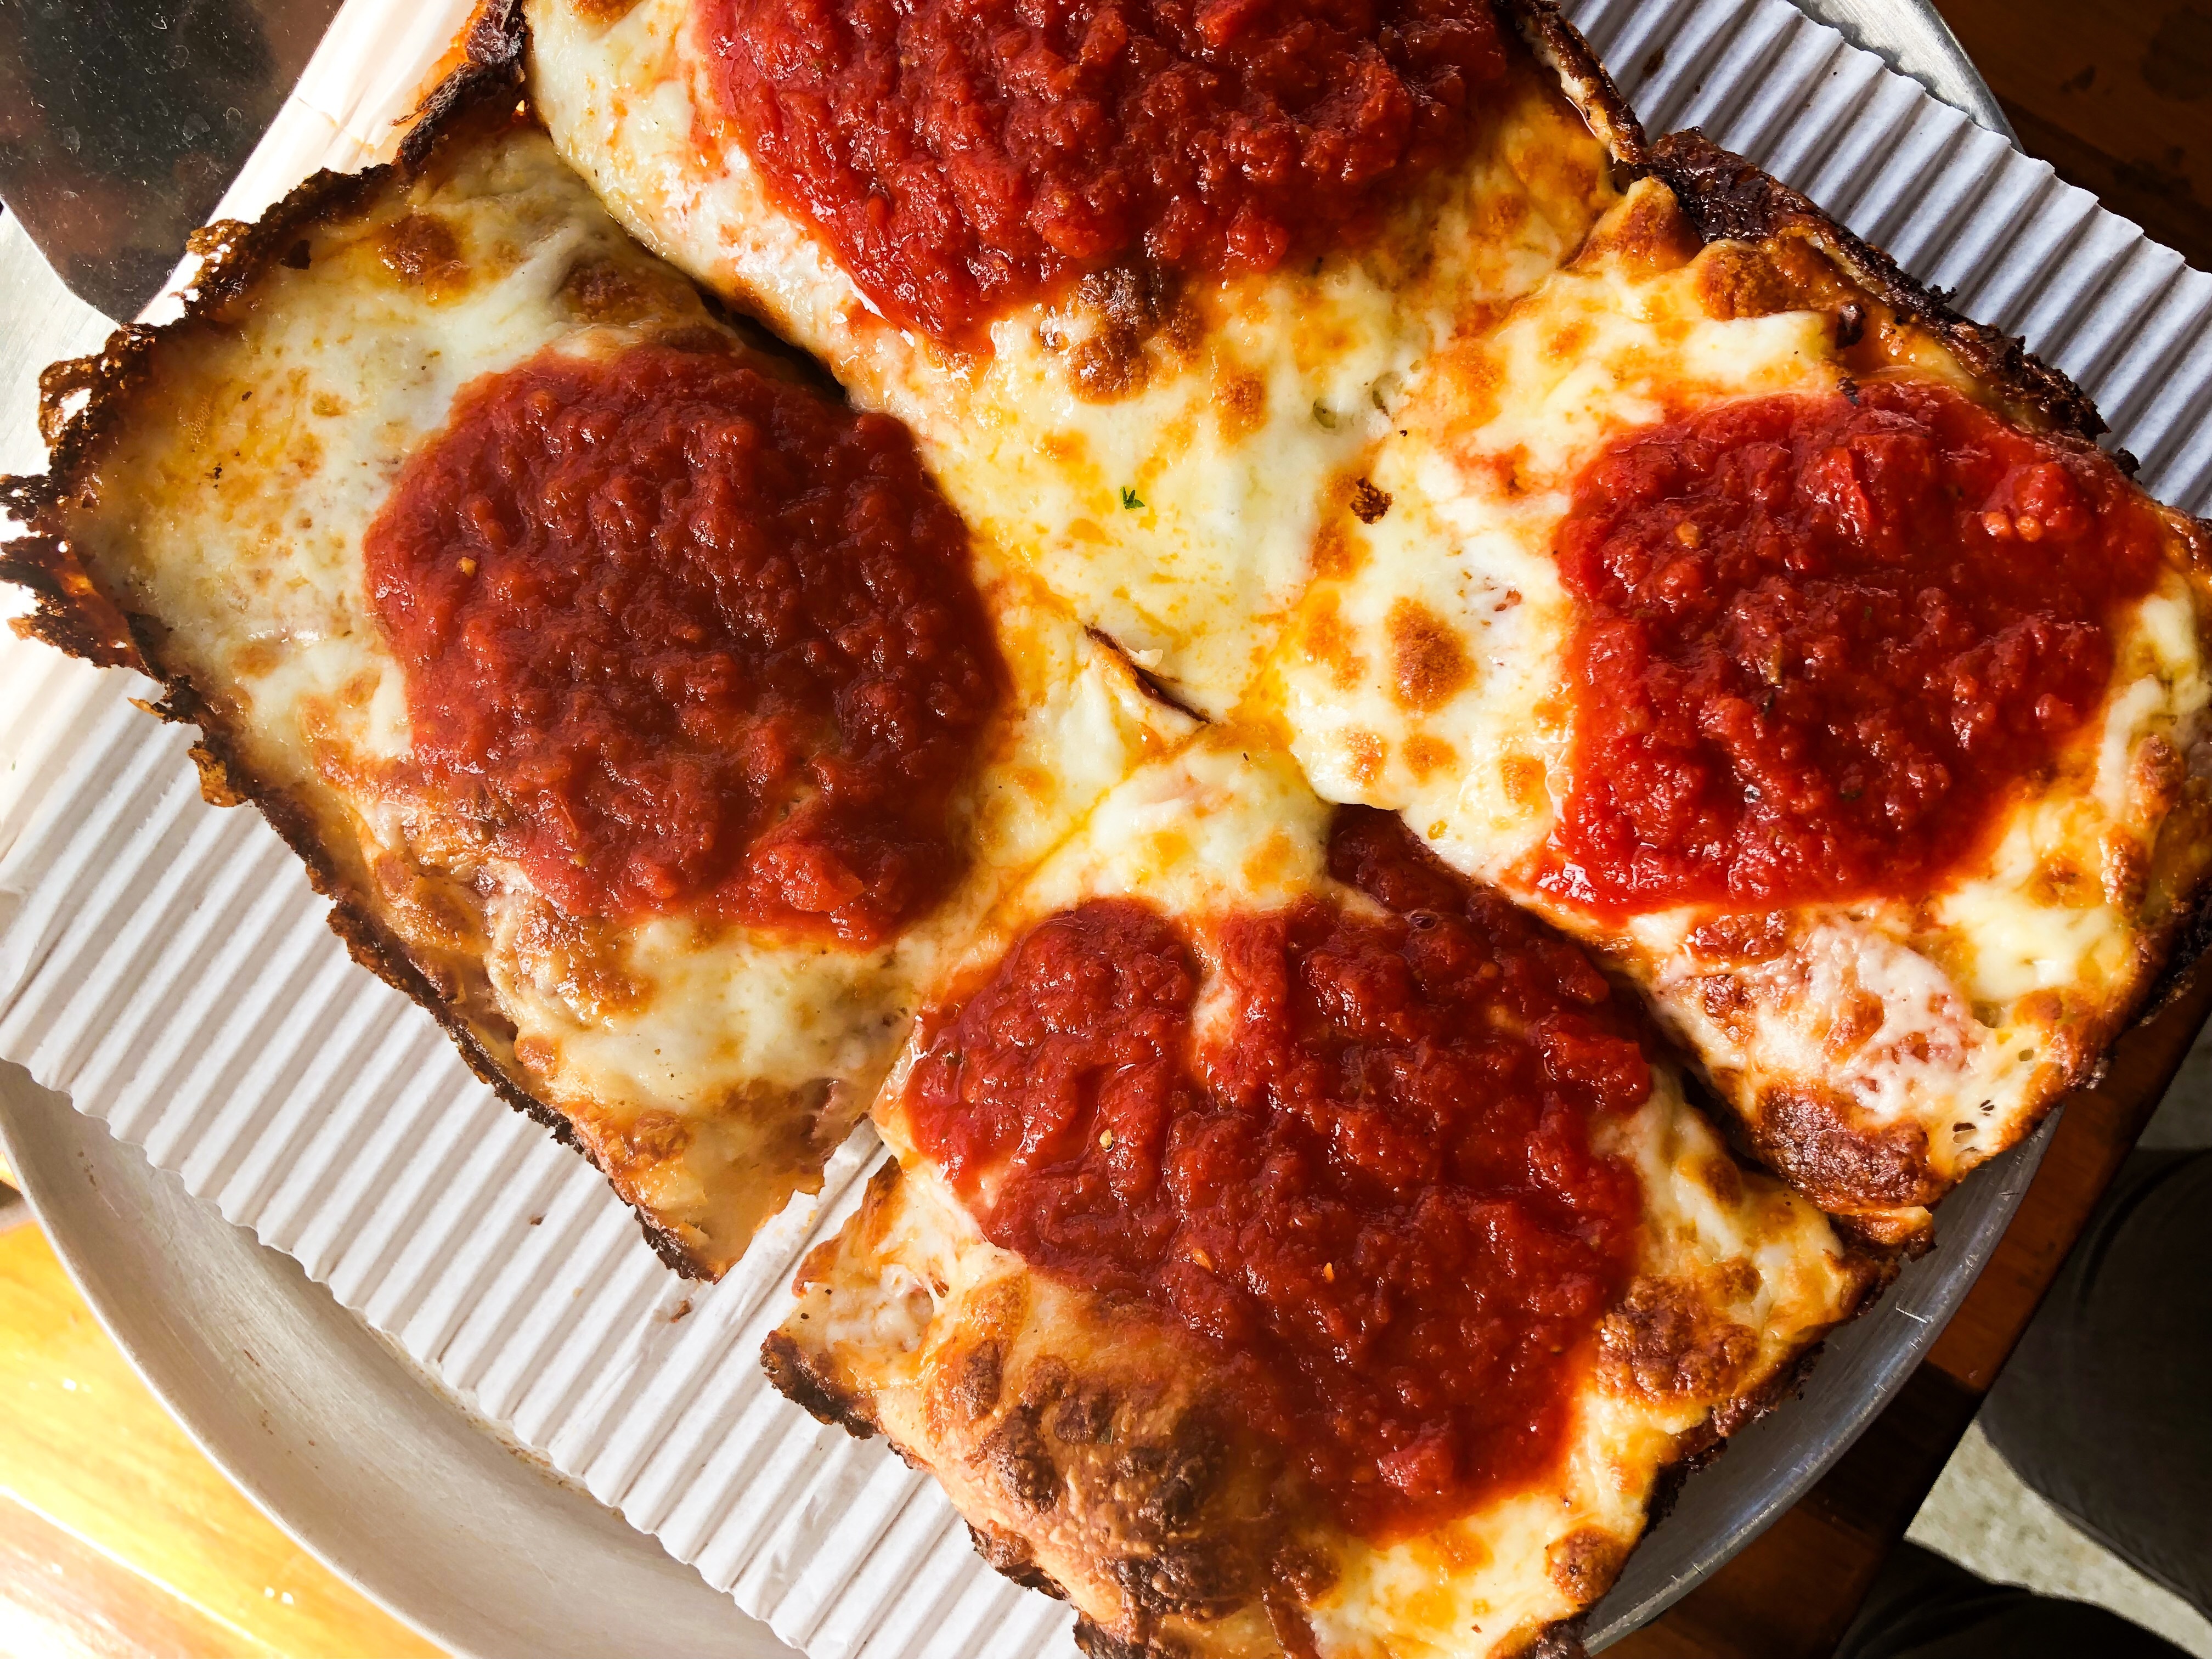 A Detroit-style pizza from Assembly Brewing, with dollops of brick-red tomato sauce